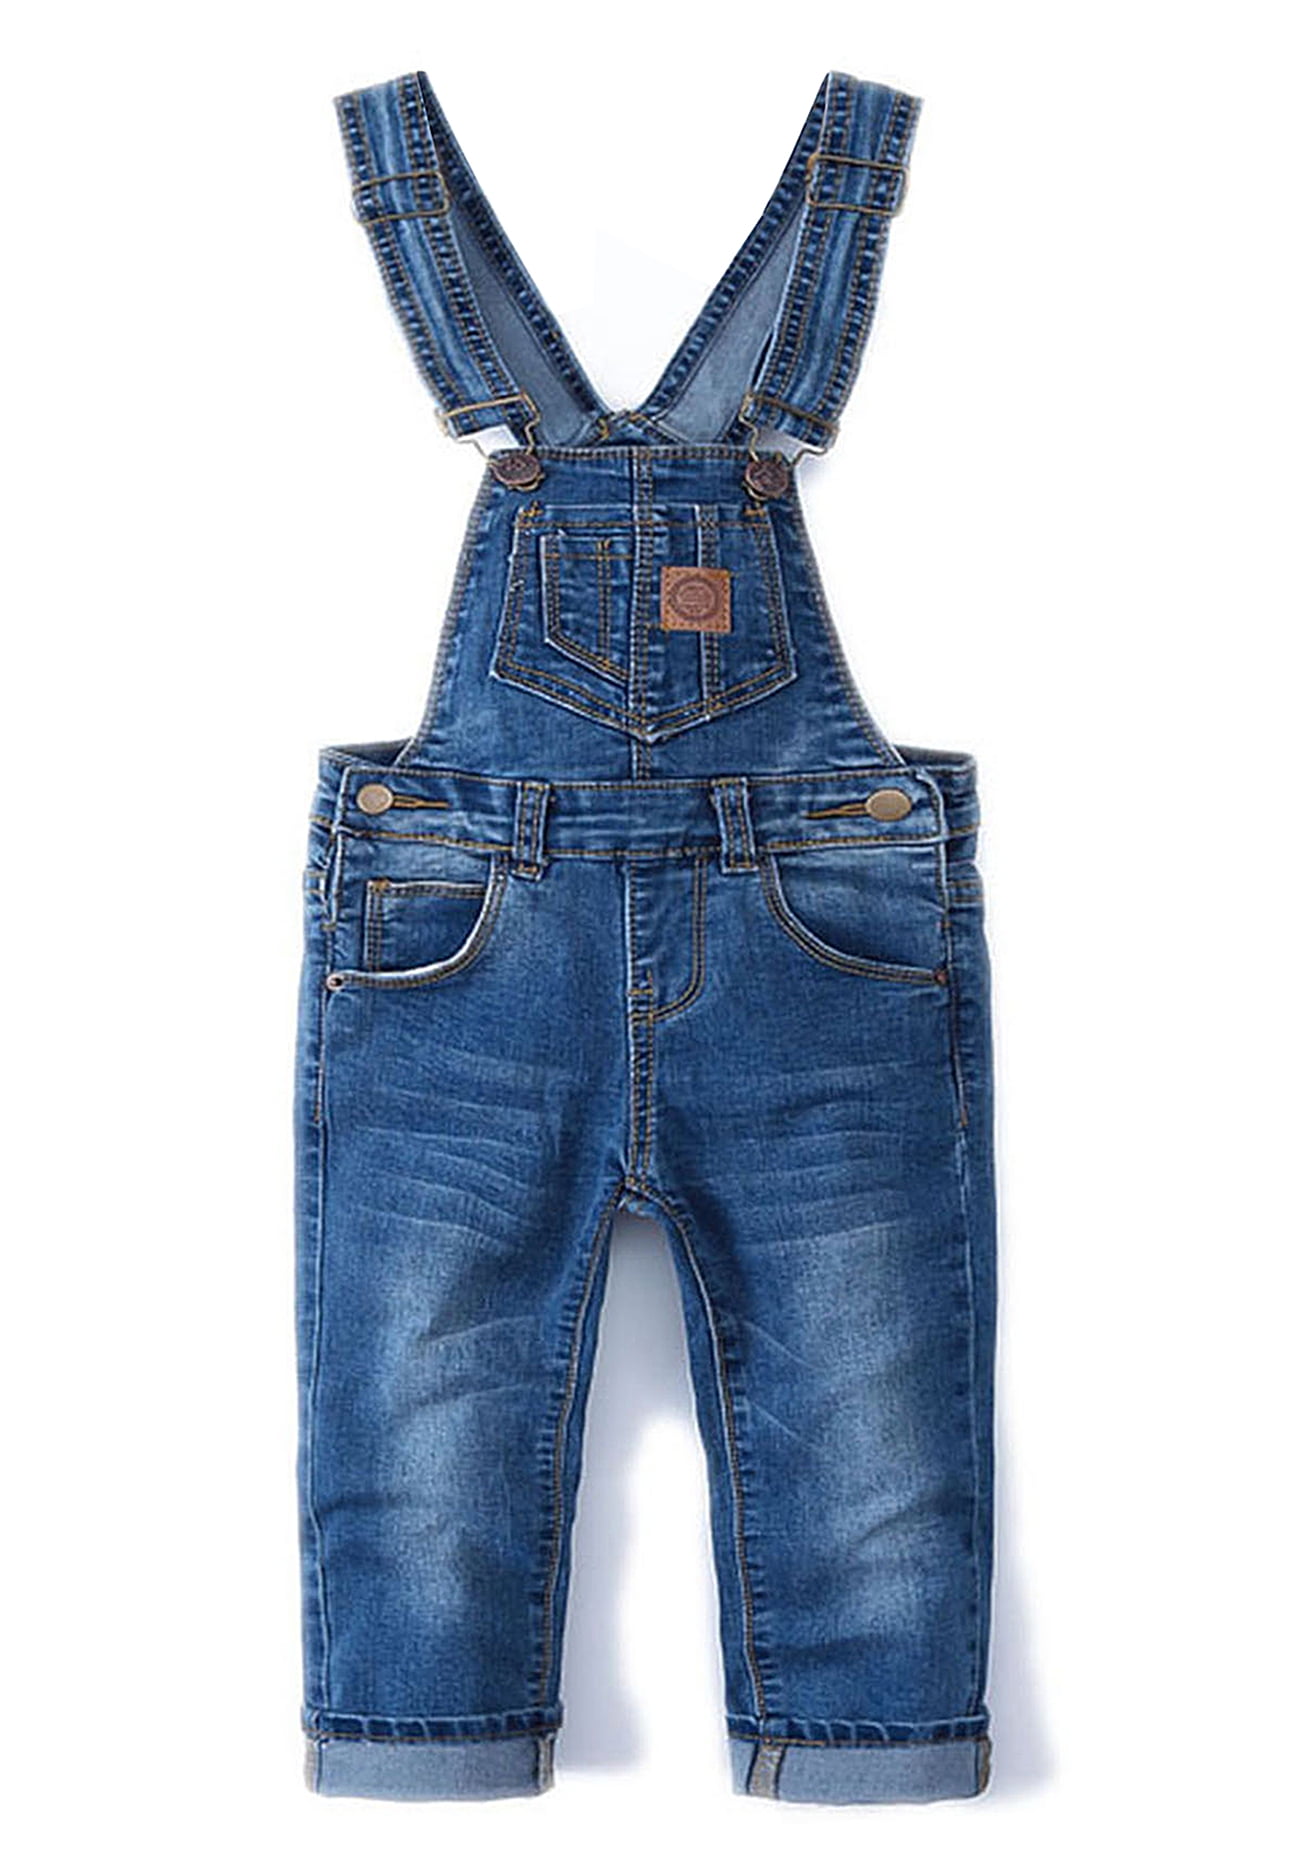 Kidscool Child Ripped Holes Stretchy Stone Washed Soft Slim Jeans Overalls,Deep Blue,7-8 Years 